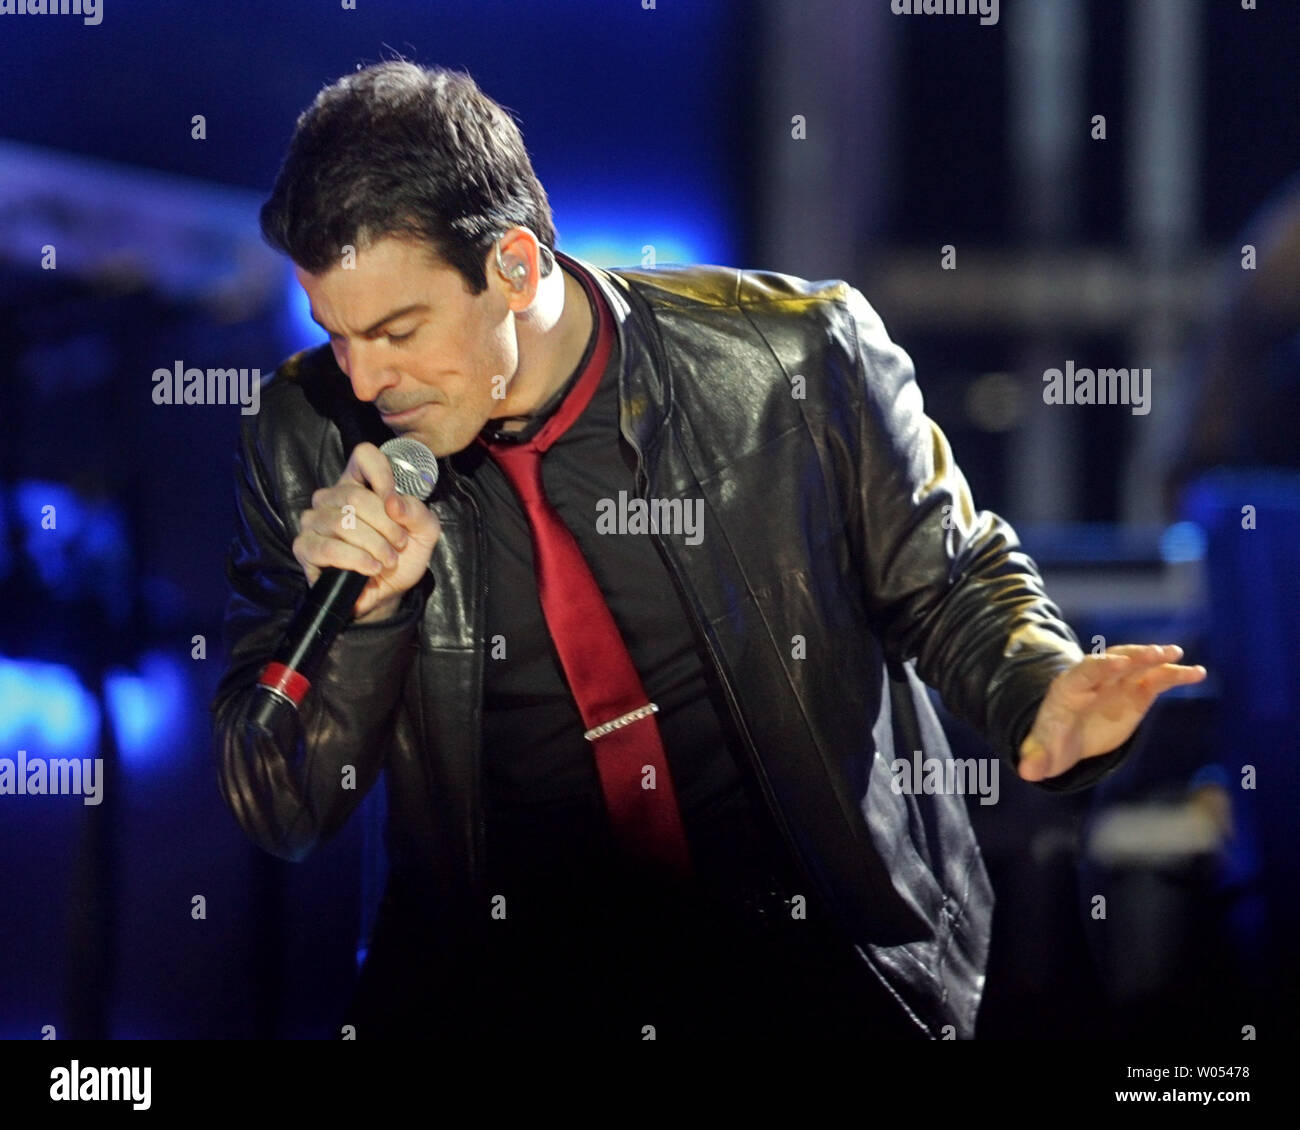 Jordan Knight of New Kids on the Block performs in concert at San Diego State University's Cox Arena on November 25, 2008.   (UPI Photo/Roger Williams) Stock Photo